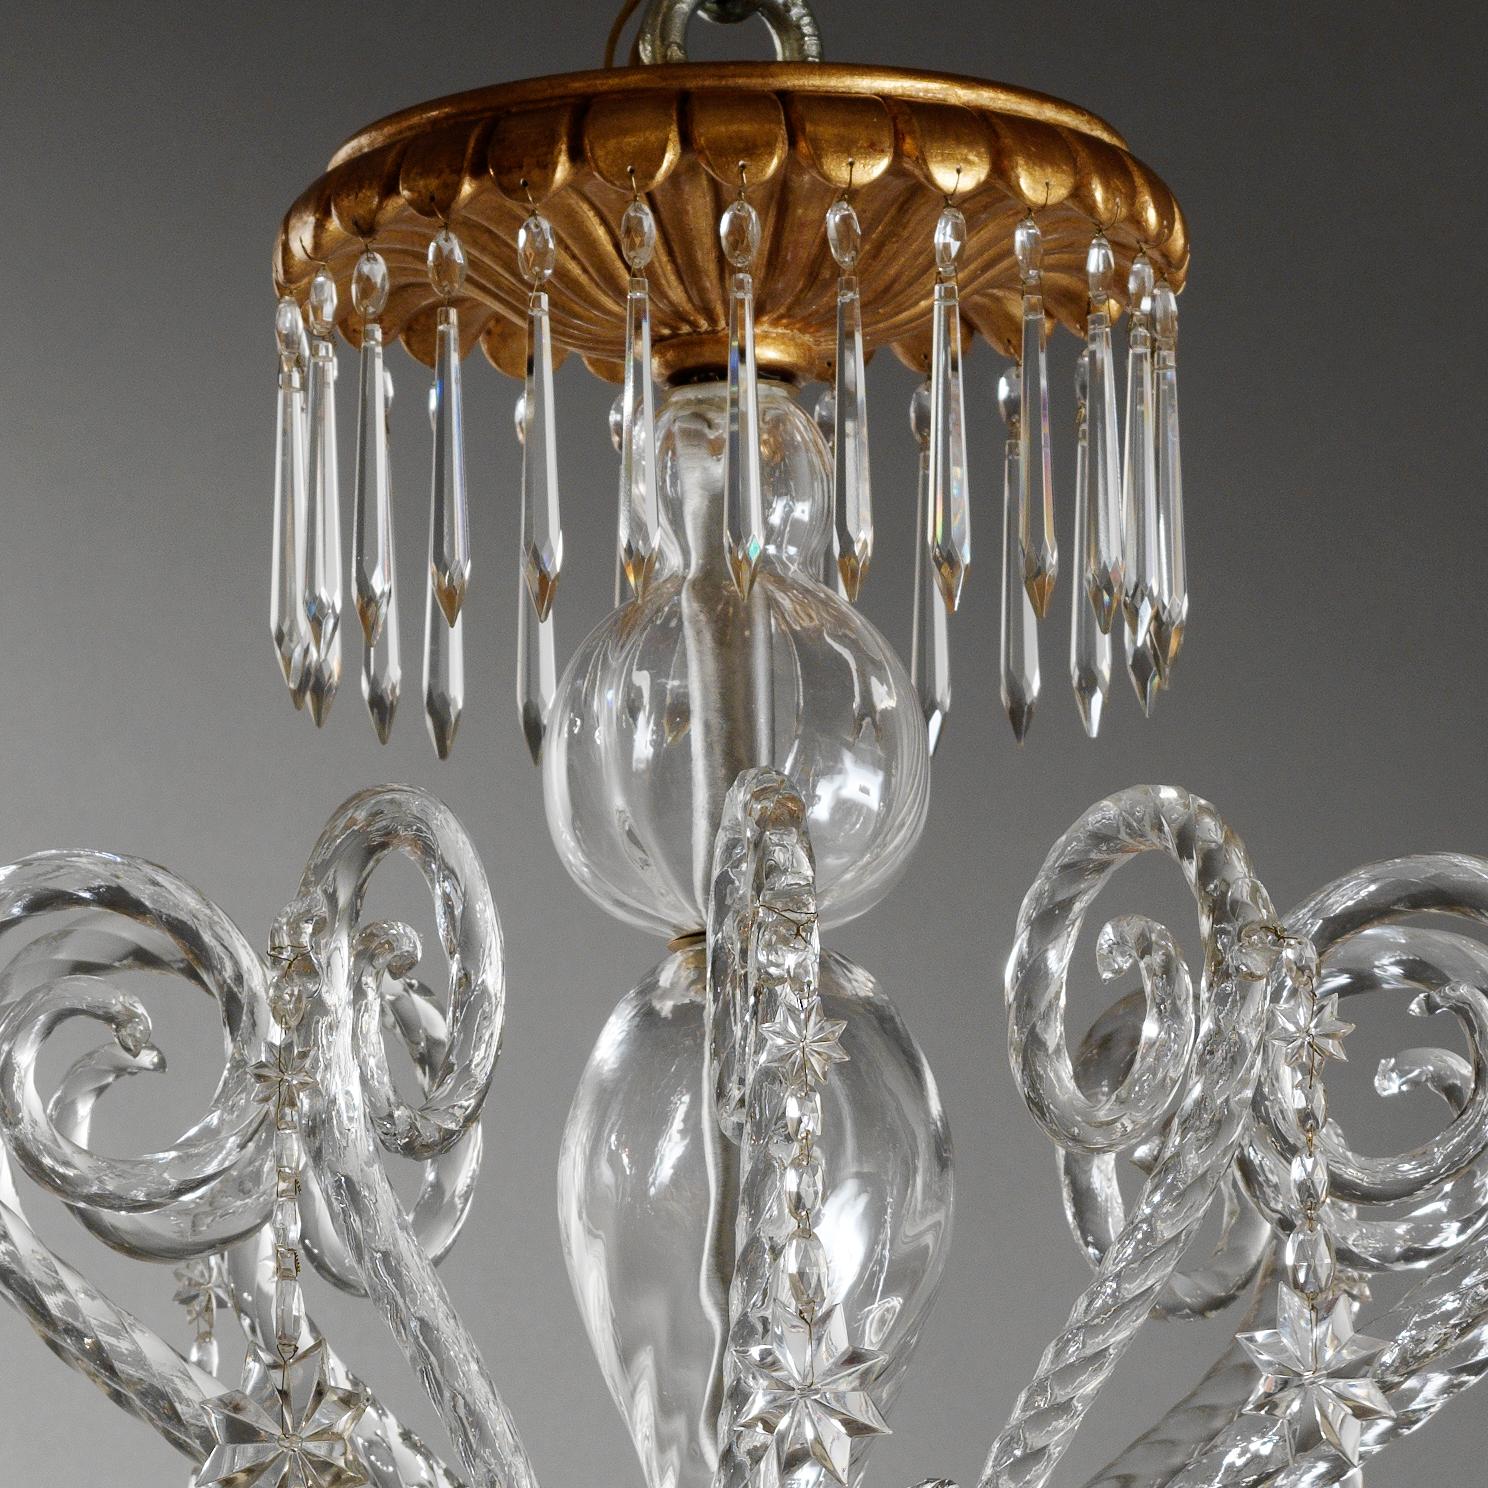 Elegant Italian Rococò style chandelier by Gherardo Degli Albizzi, blown glass, in transparent color with gilt wood. Top crown has a lot of crystals hanging from, while the middle cup hold plenty of pastorals from which many bohemian star-shaped and